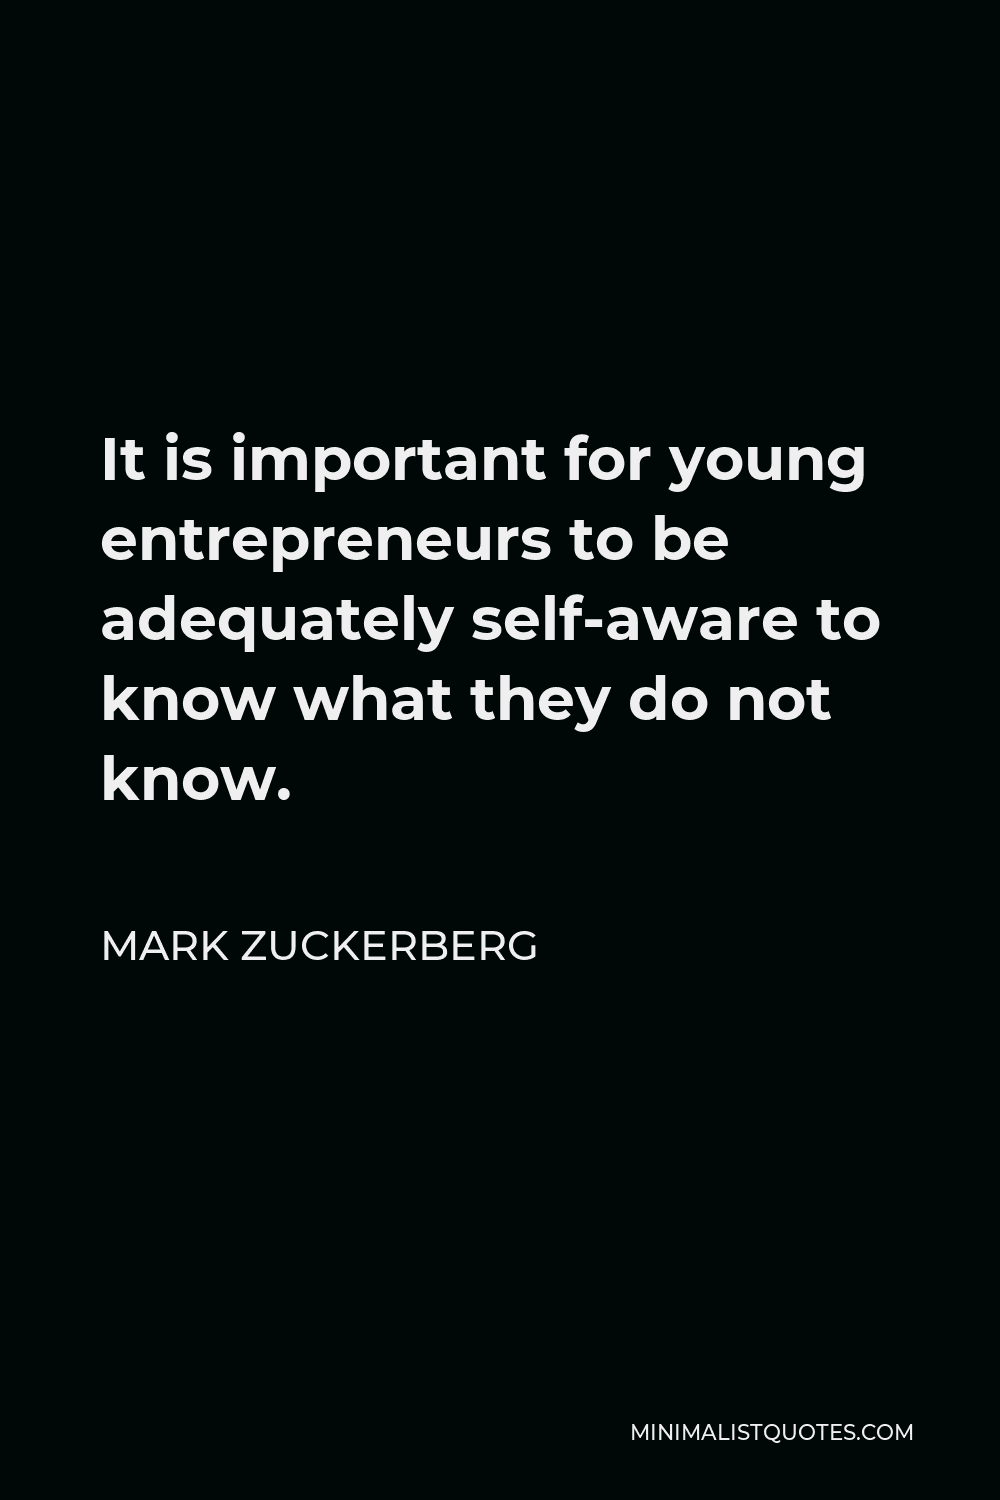 Mark Zuckerberg Quote - It is important for young entrepreneurs to be adequately self-aware to know what they do not know.